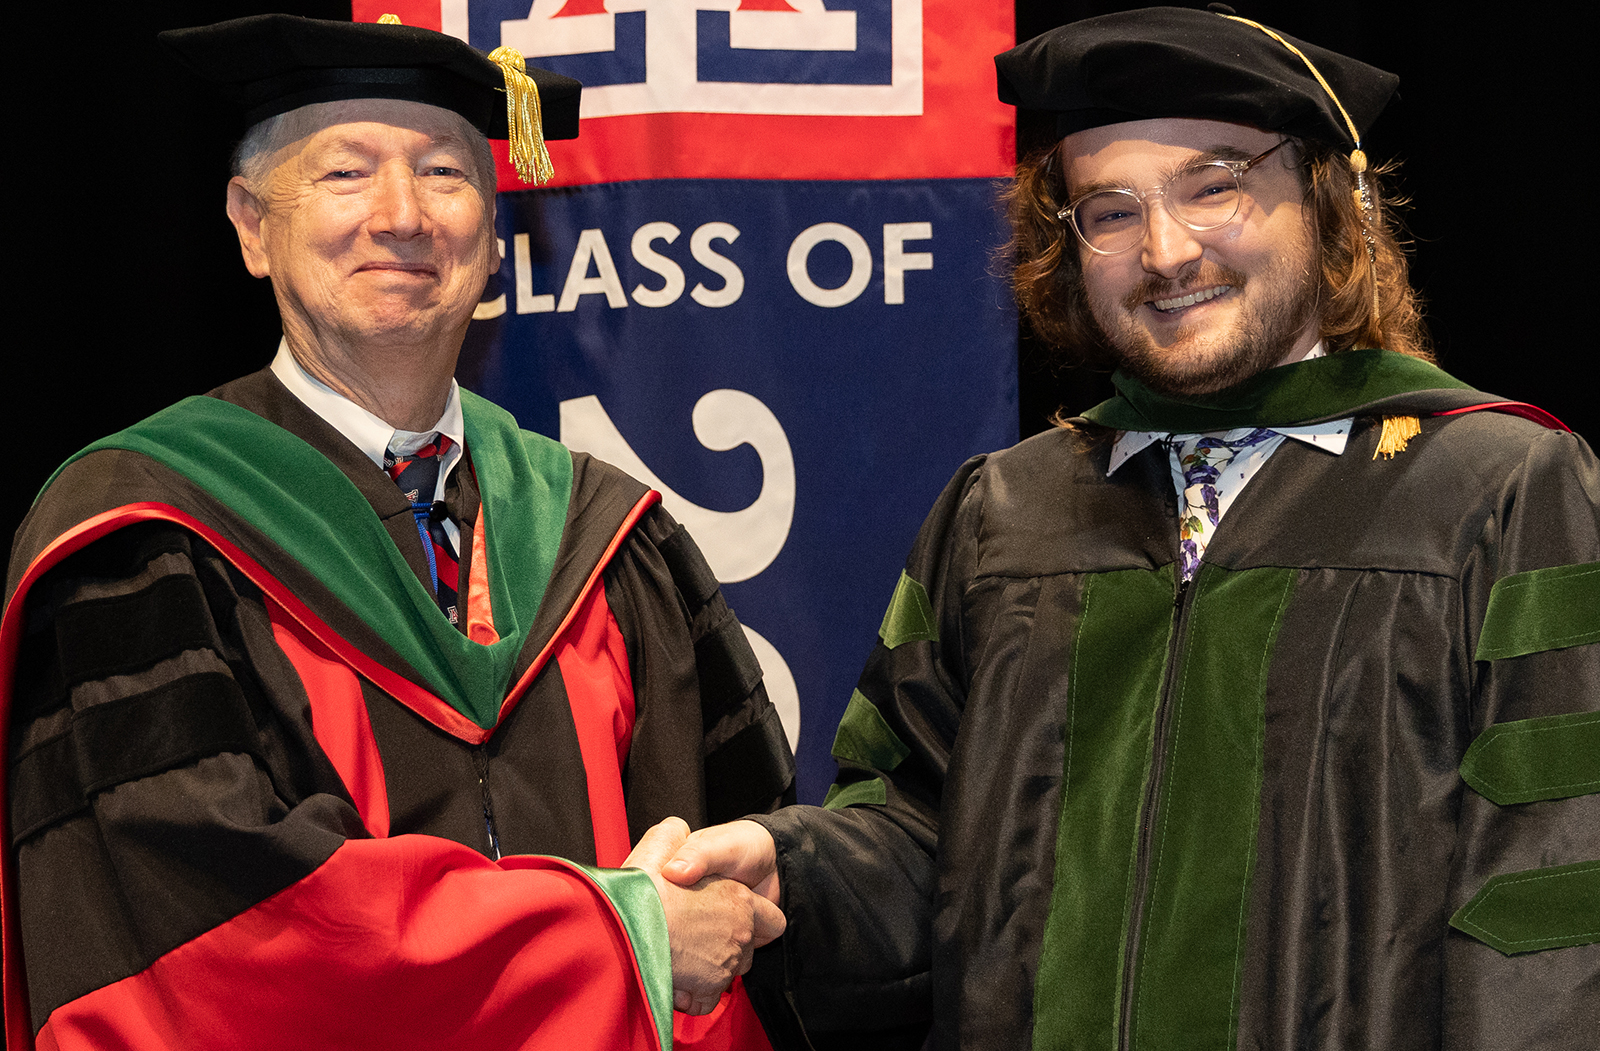 Dean Guy Reed, MD, MS, presents Austin Cotter, MD, with his diploma during the Class of 2023 Commencement